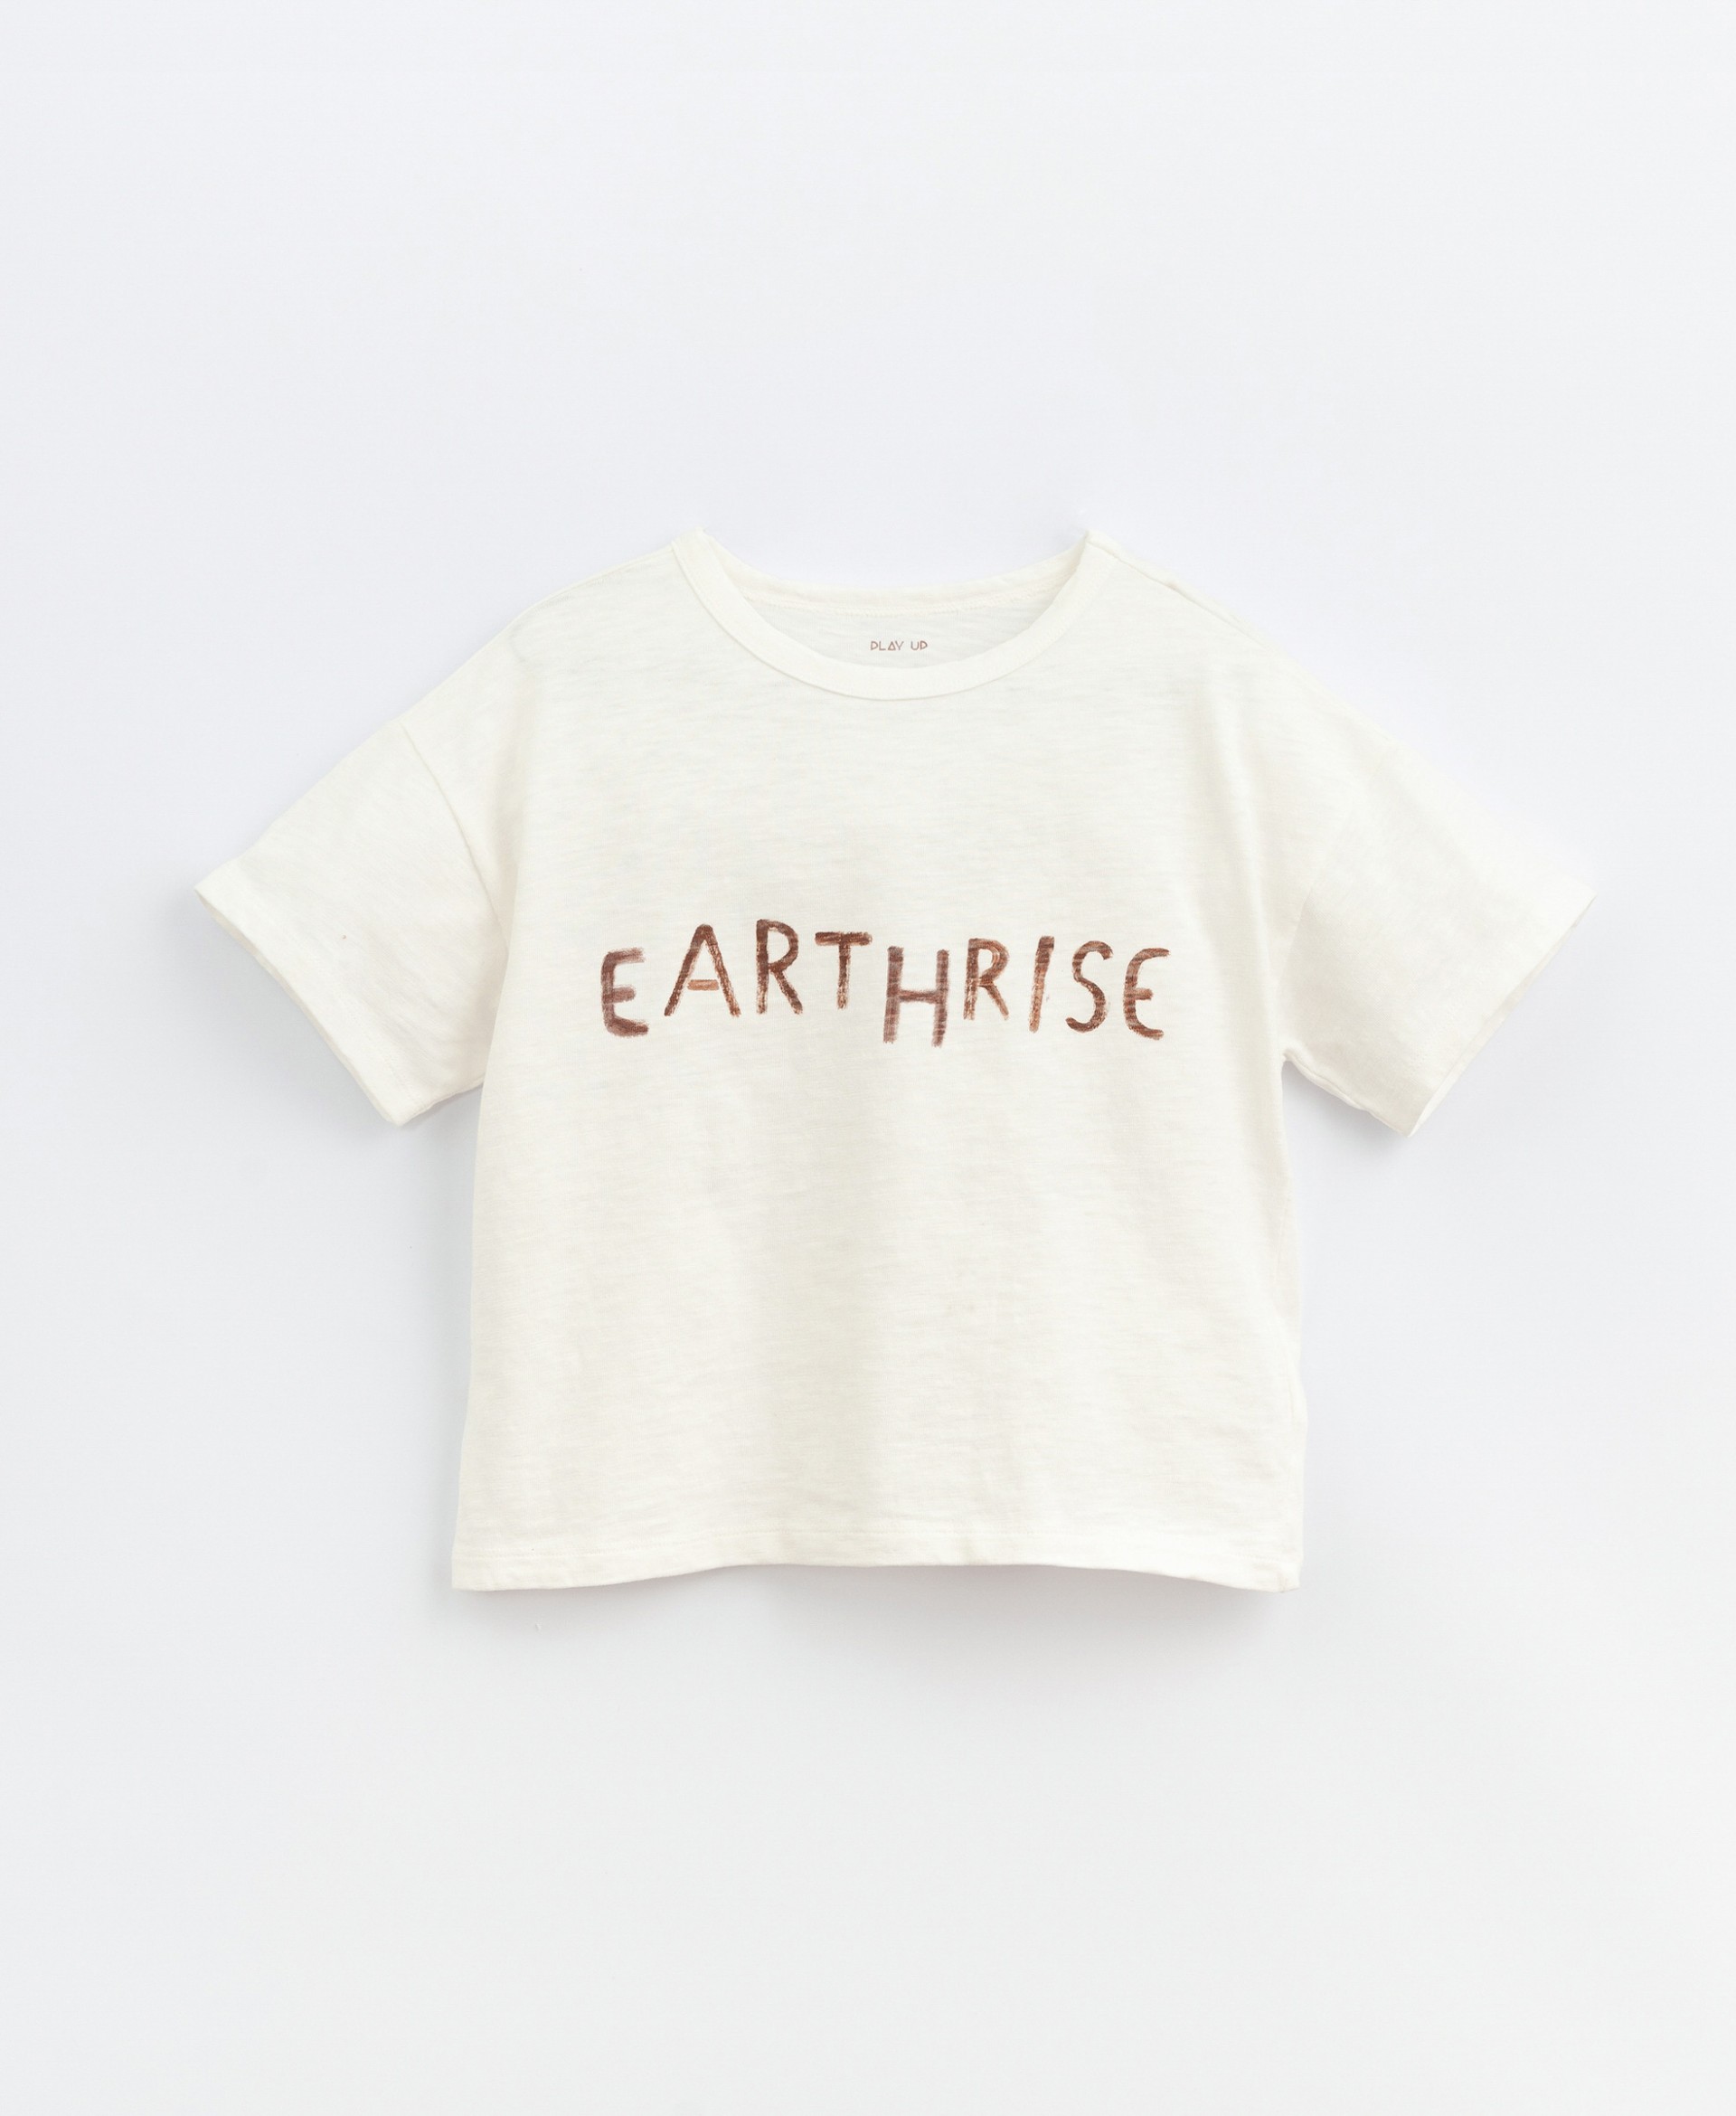 T-shirt in blend of organic cotton and linen | Basketry